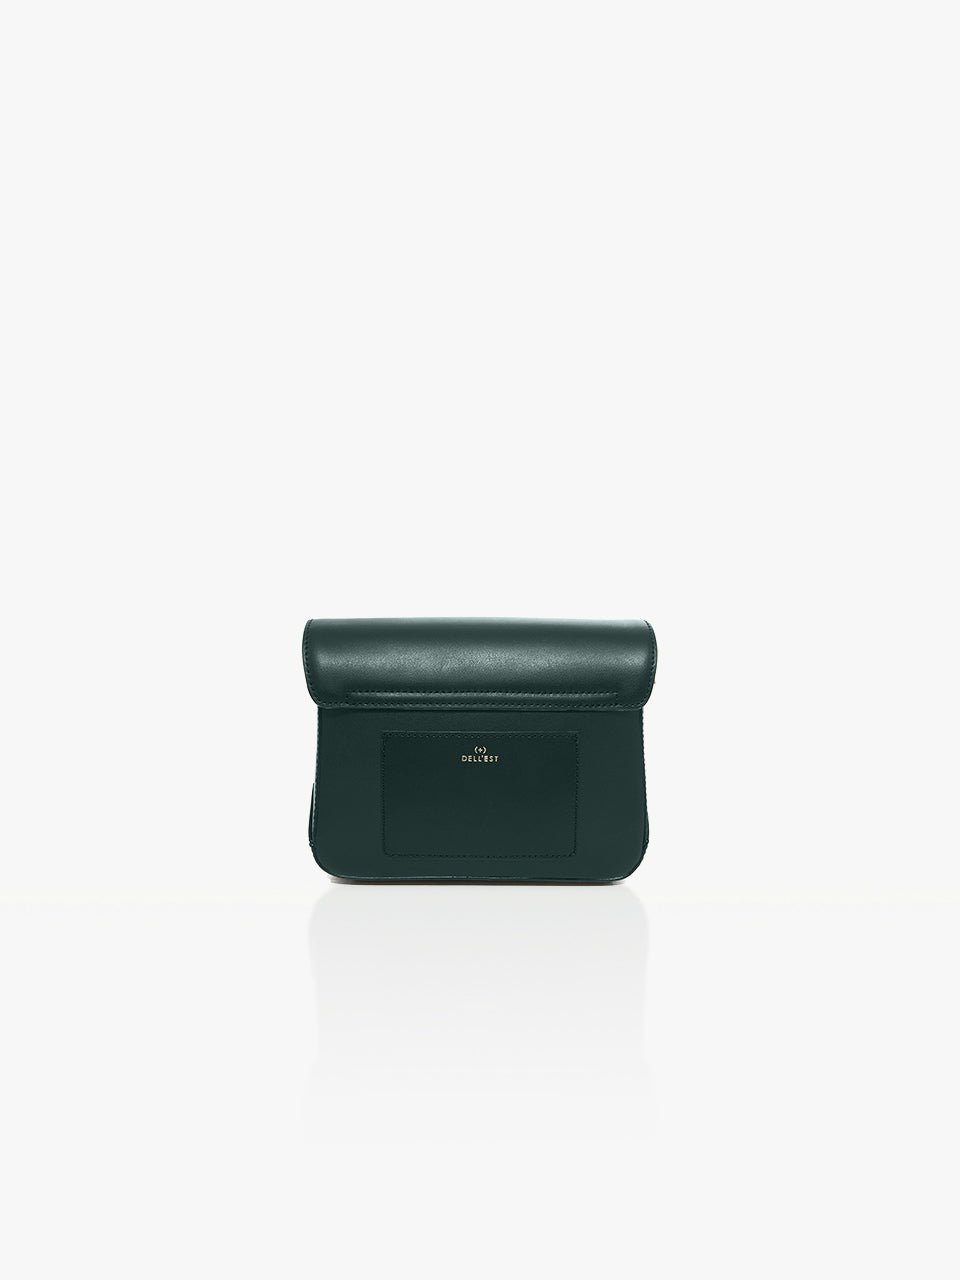 Vollutino Bag_S_Solid Moss Green